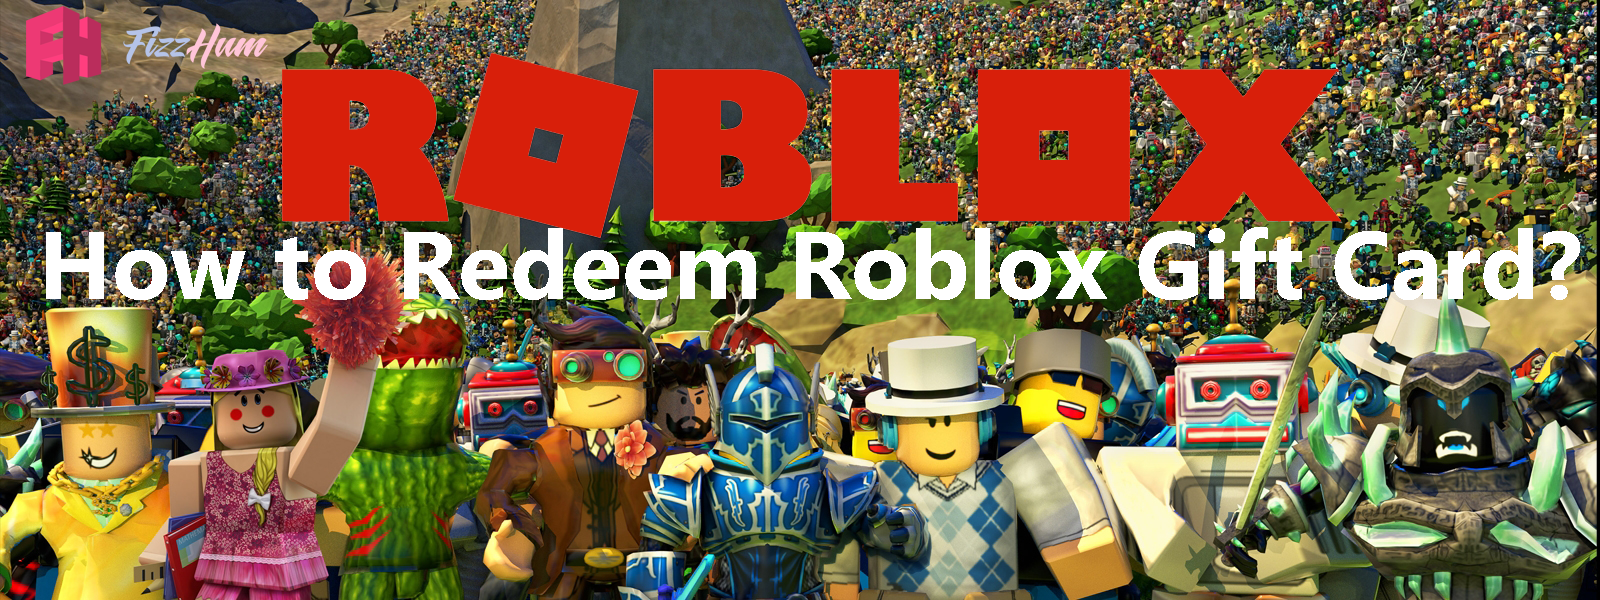 How To Redeem Roblox Gift Card Step By Step 2021 Fizzhum Com - where do i find roblox gift cards